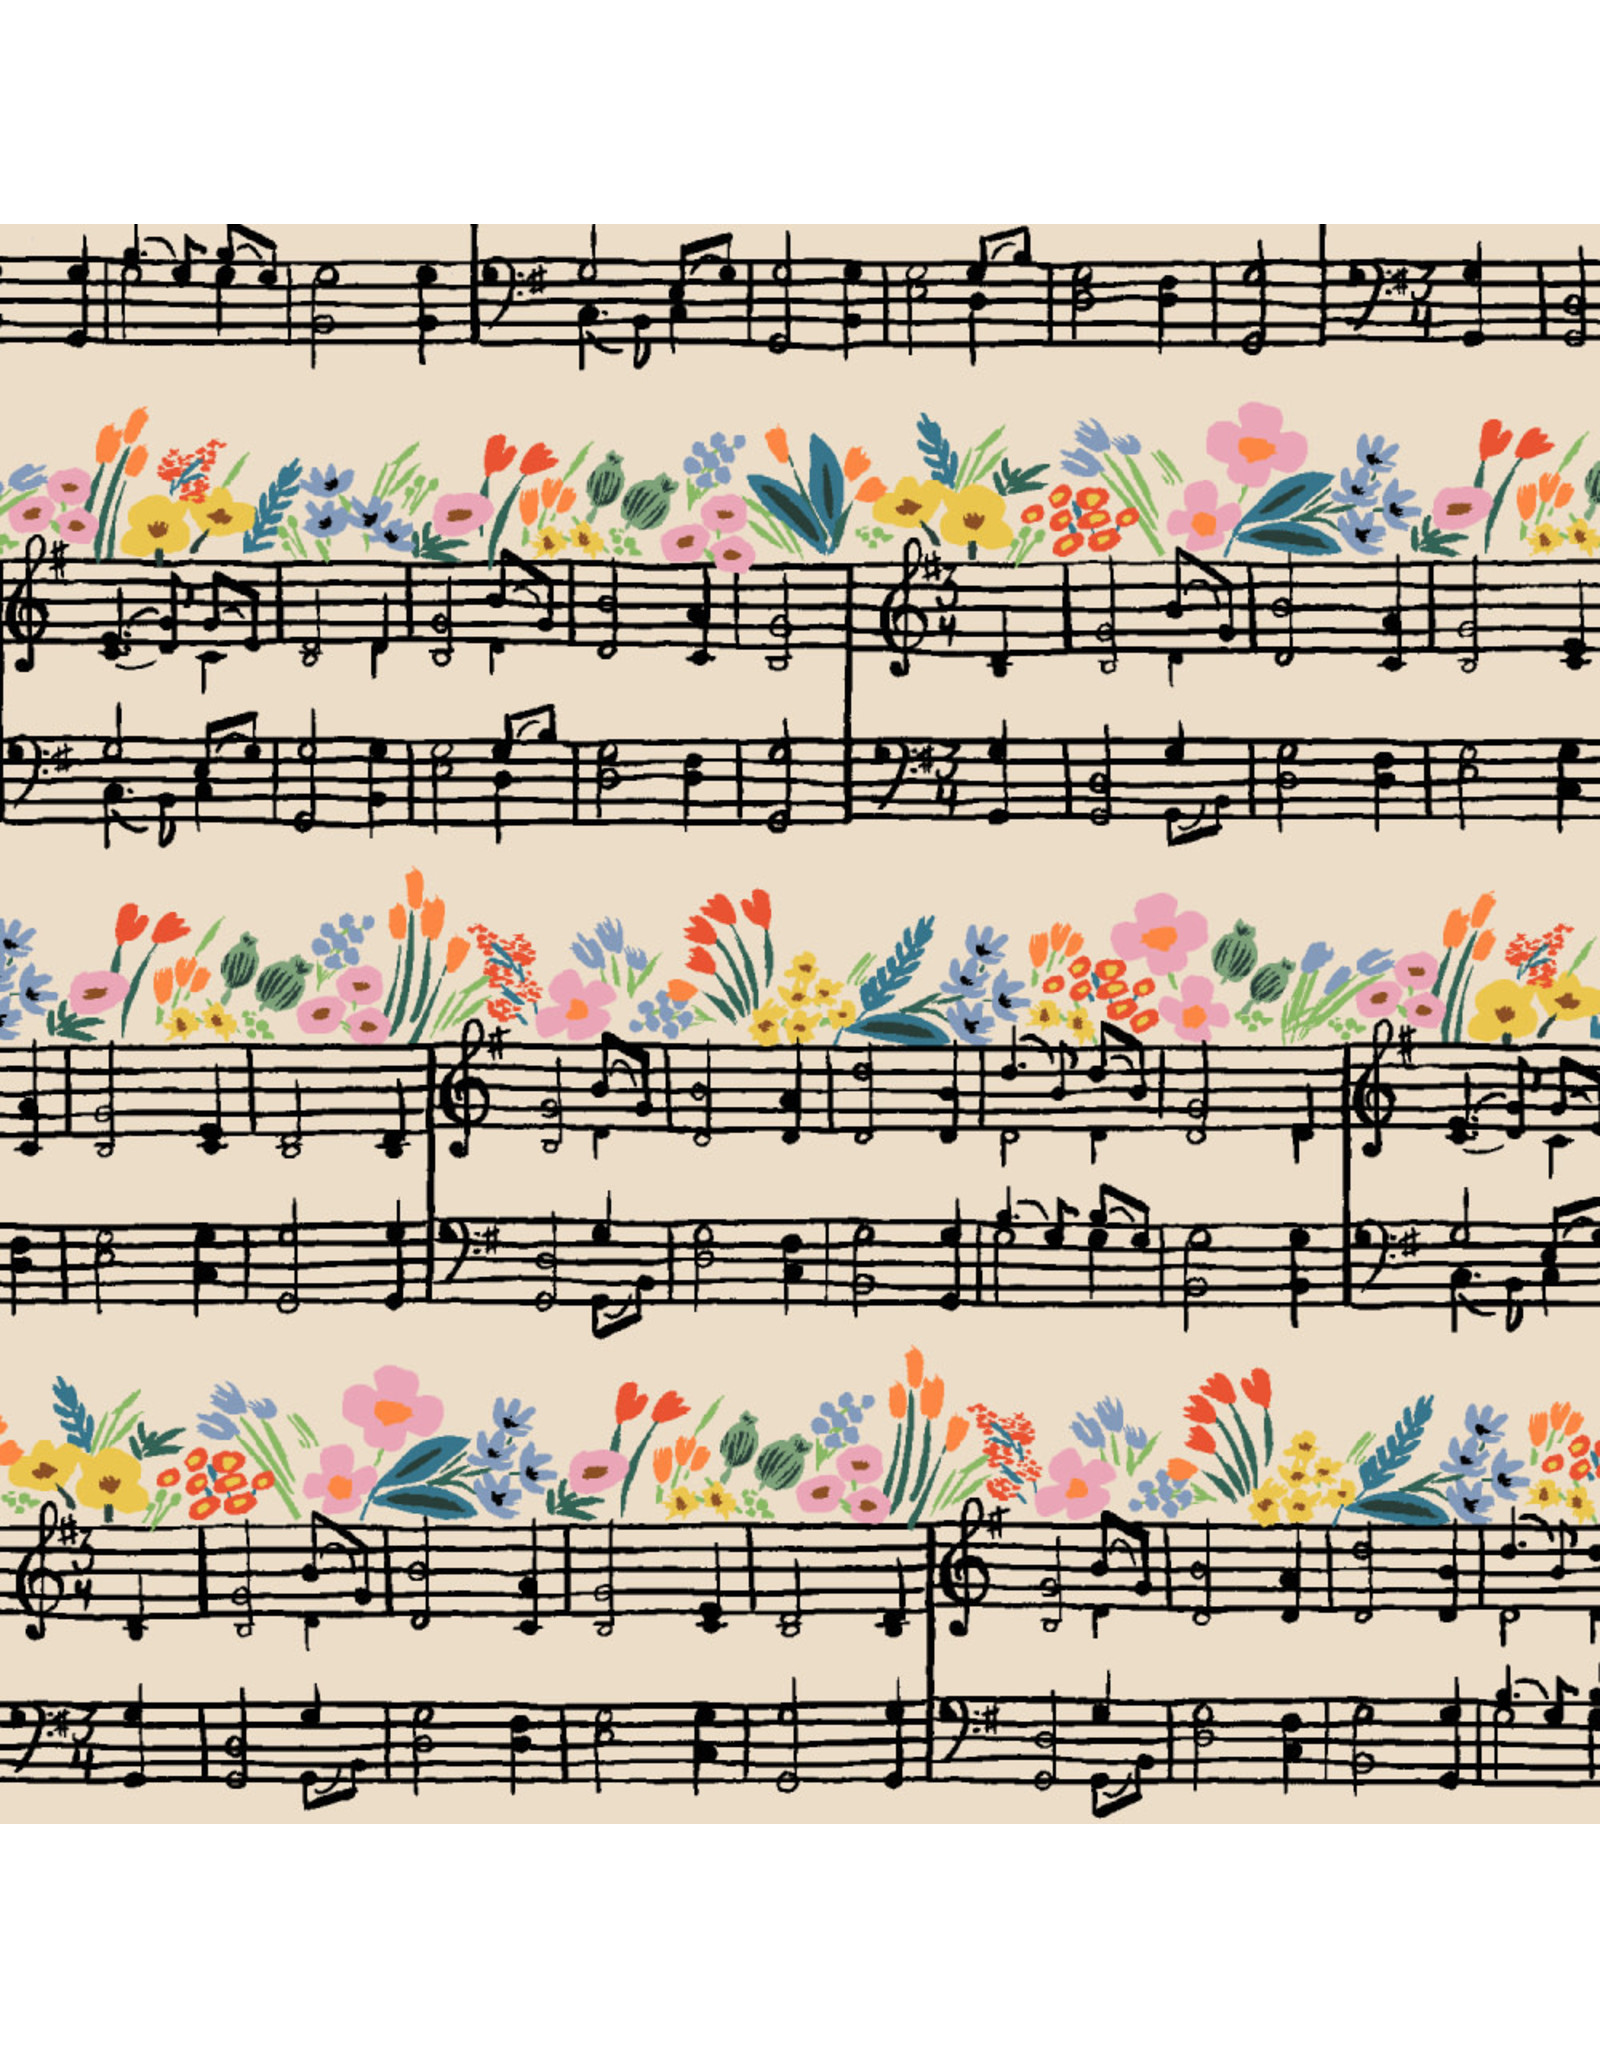 Rifle Paper Co. Linen/Cotton Canvas, Bramble, Music Notes in Natural, Fabric Half-Yards